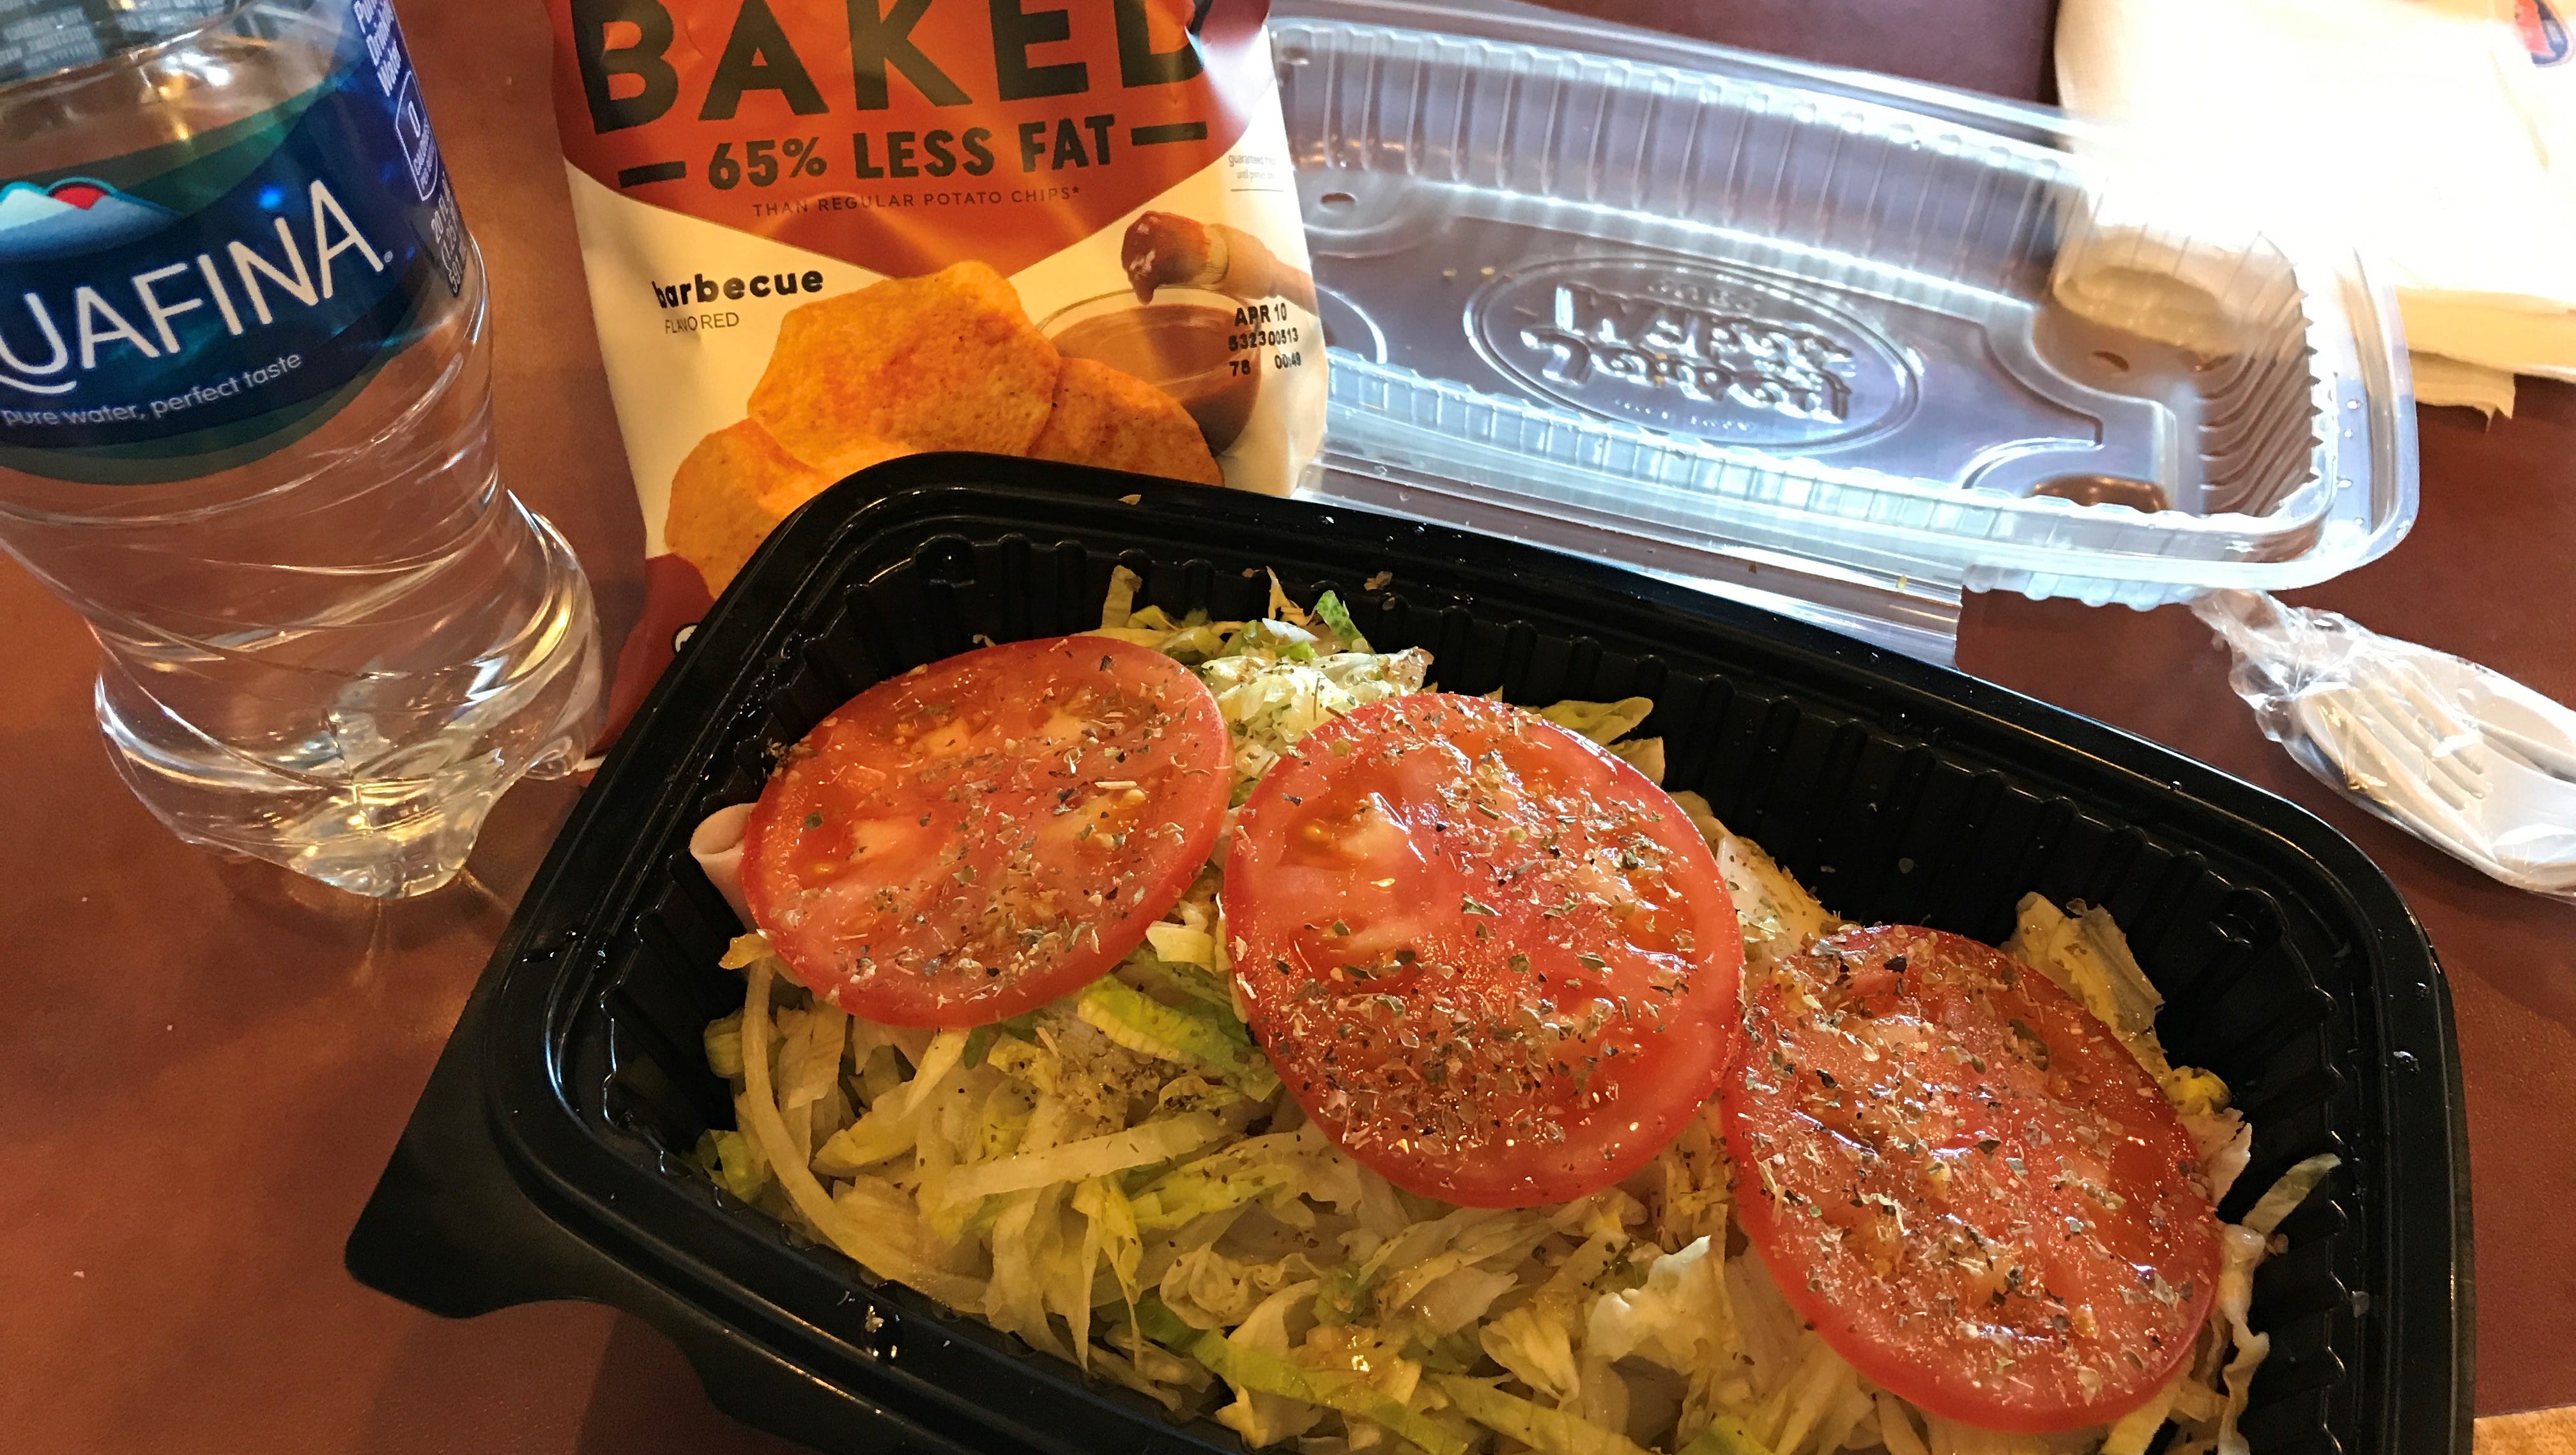 jersey mike's tub keto